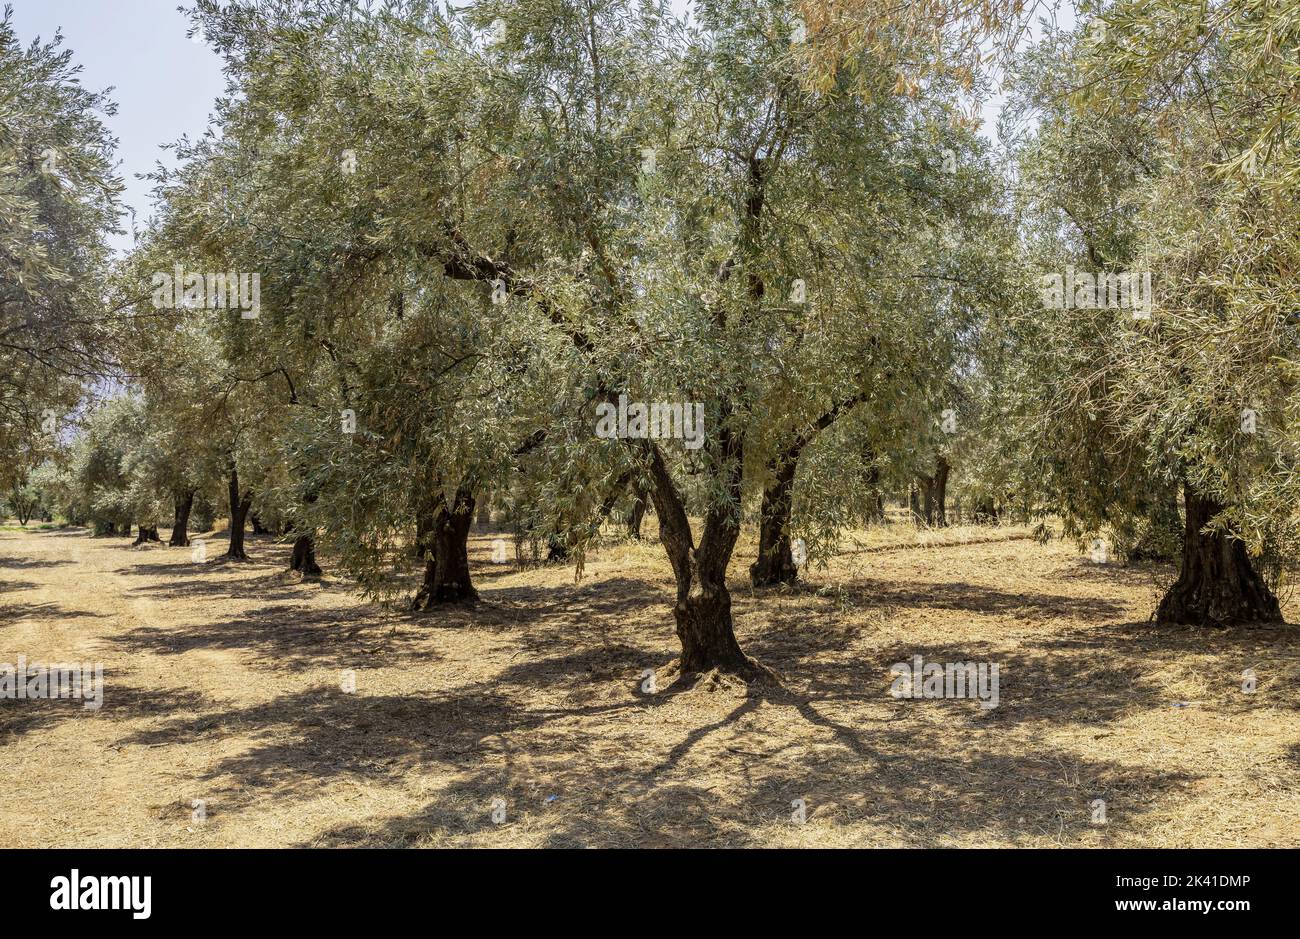 Olive grove concept. Row of olive trees on dry ground background sunny day. Healthy fruit, organic food, Greek oil, antioxidant properties. Stock Photo